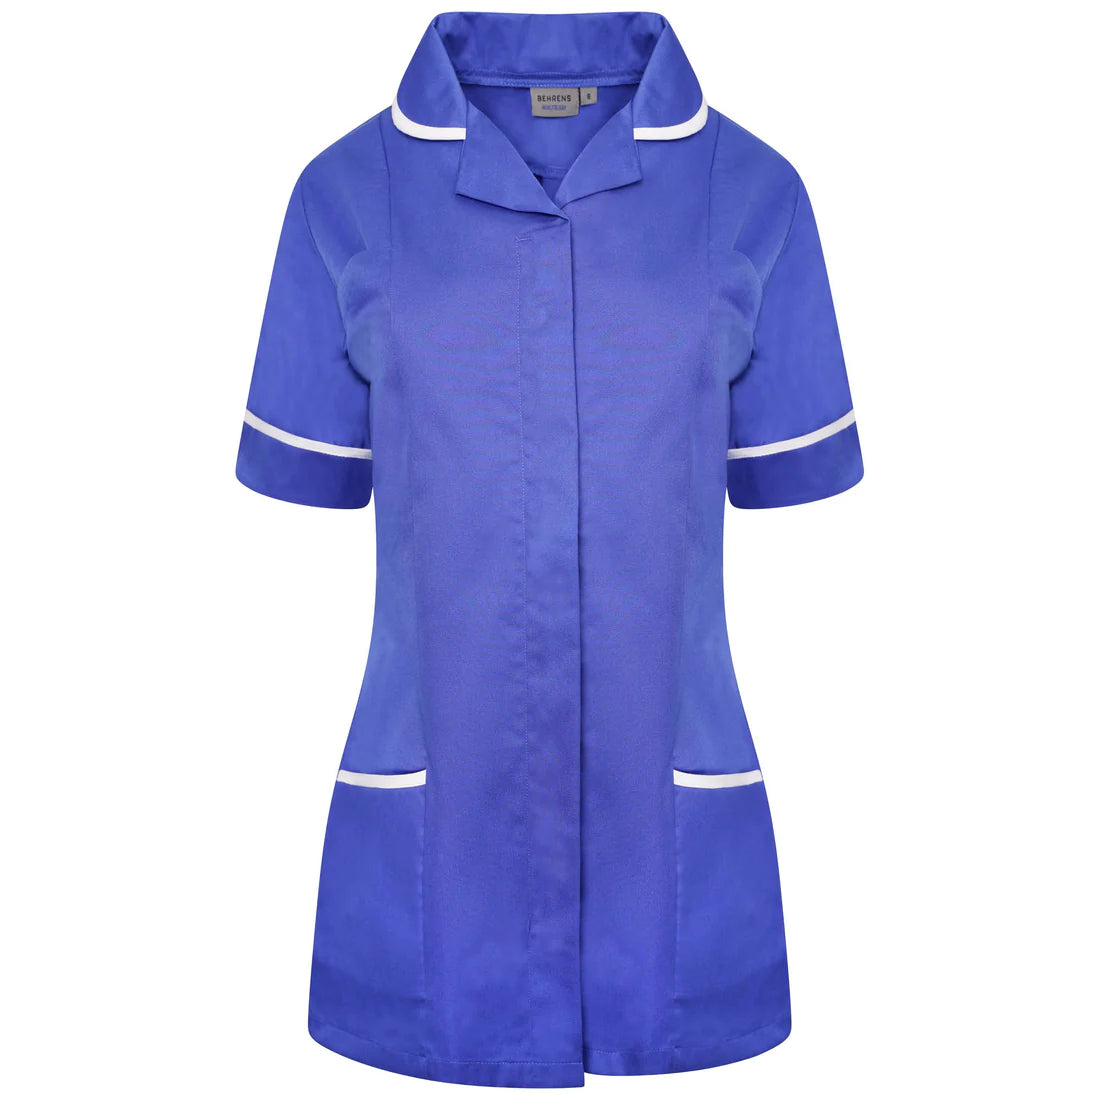 Royal Blue/White Contrast Ladies Tunic with Round Collar - NCLTPS